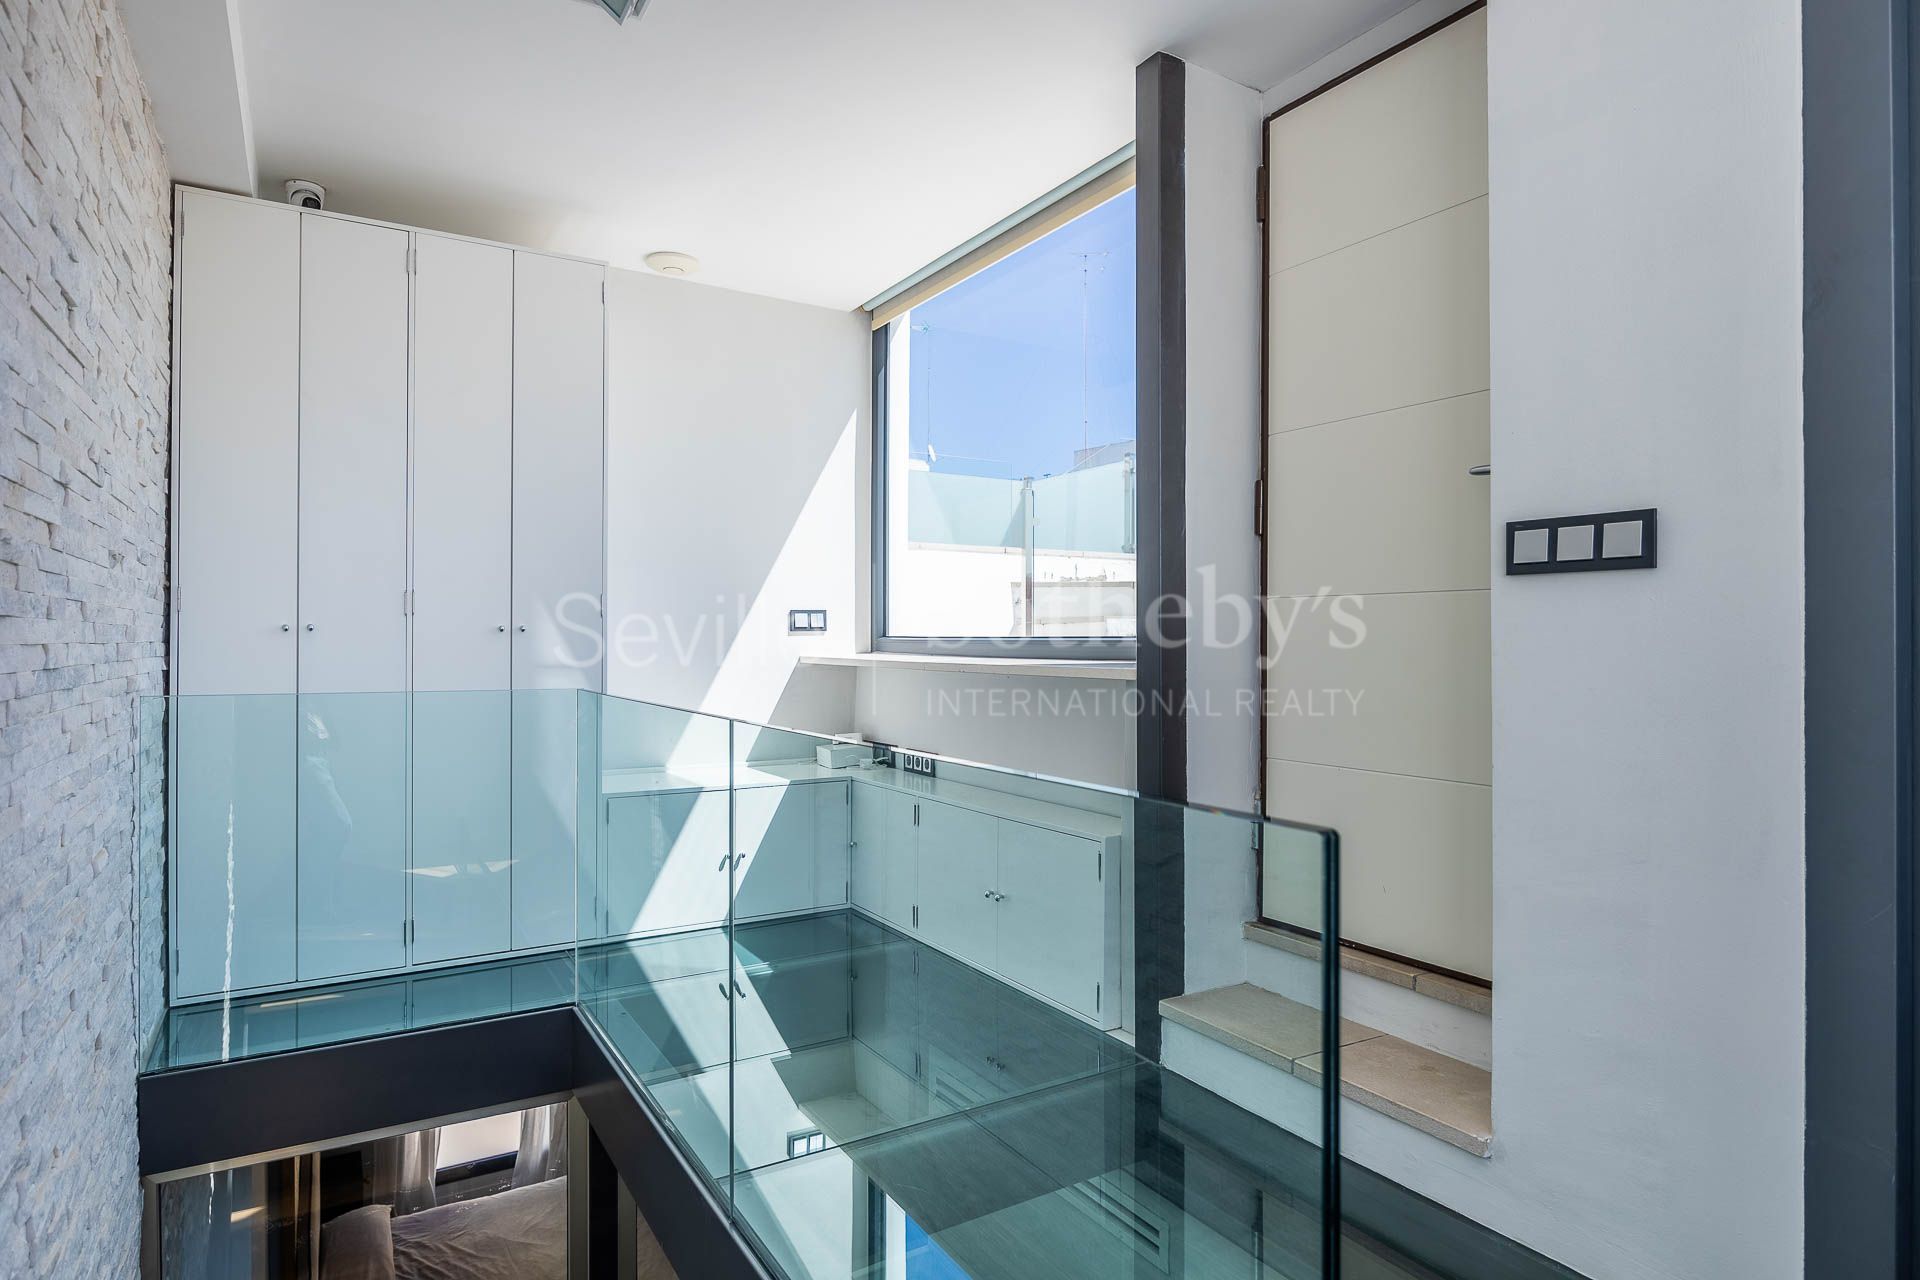 Exclusive house with pool situated in one of the most exclusive areas of Nervion